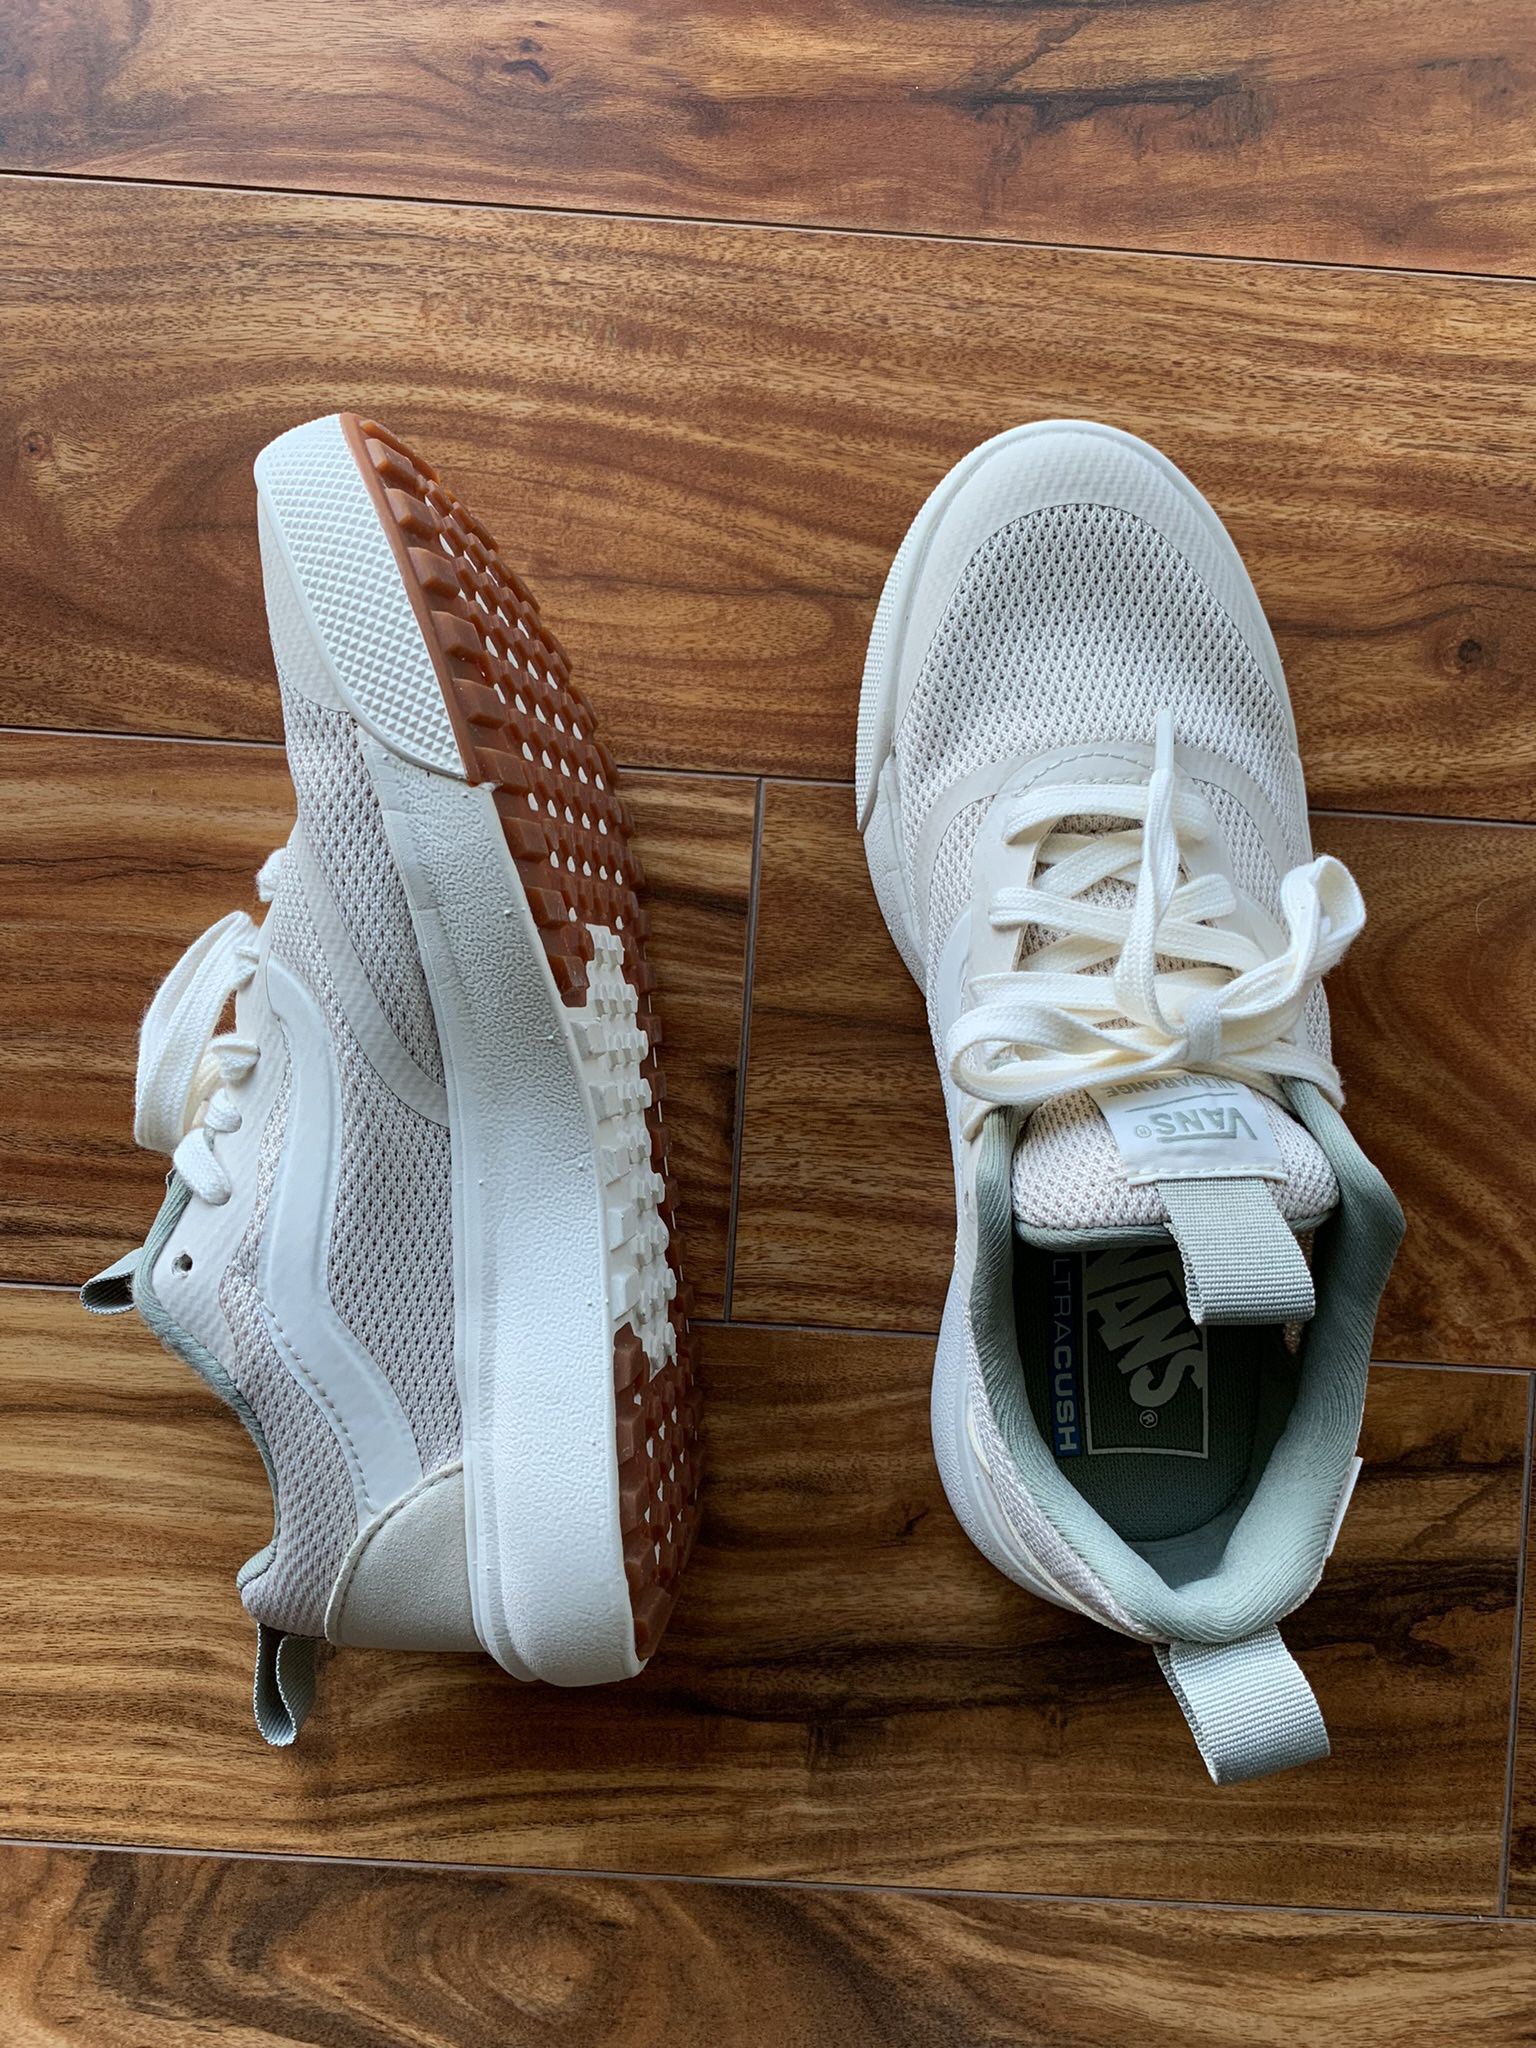 Vans Ultrarange Rapidweld | Sandshell And True White | Women's Size 6 for Sale in CA - OfferUp